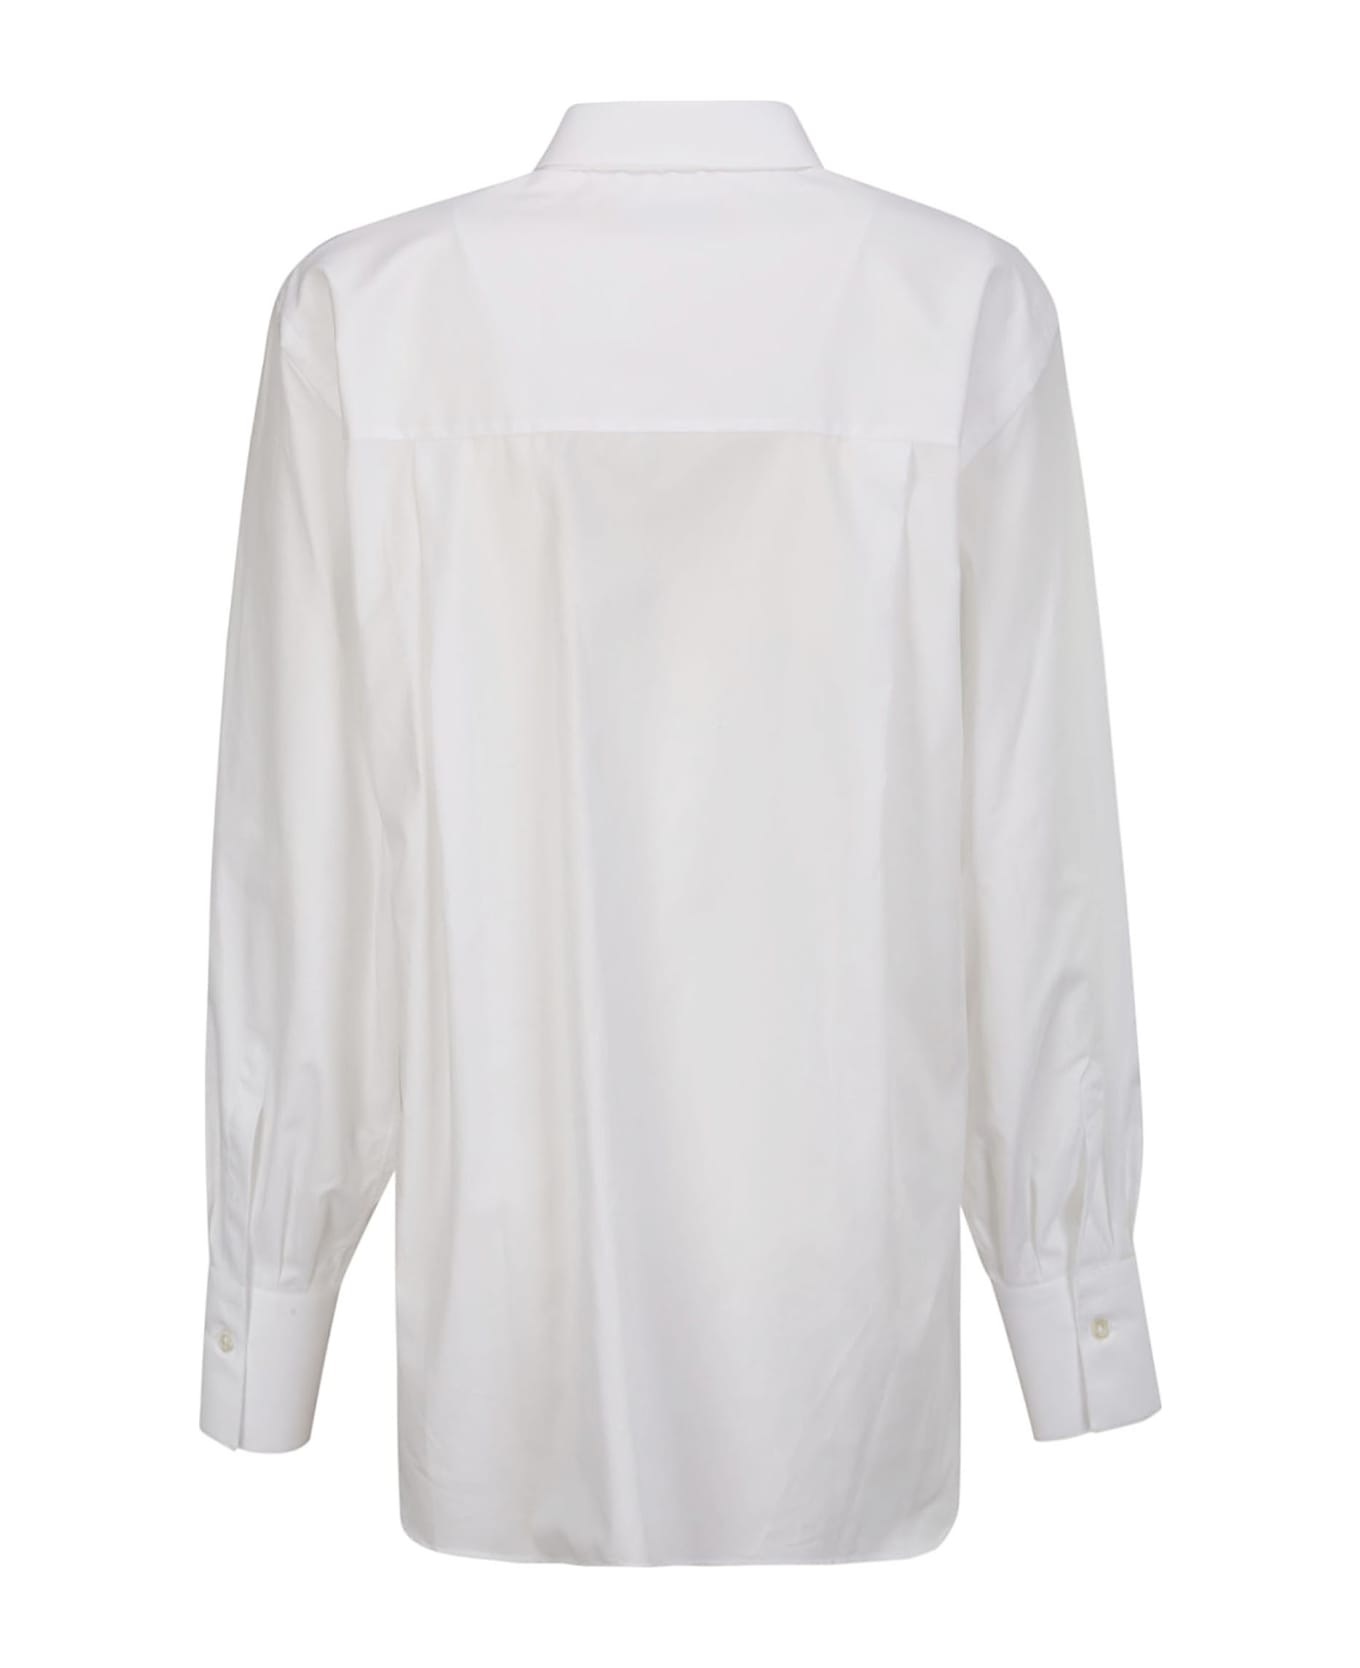 Wild Cashmere Shirt With Hidden Buttons - OFF-WHITE